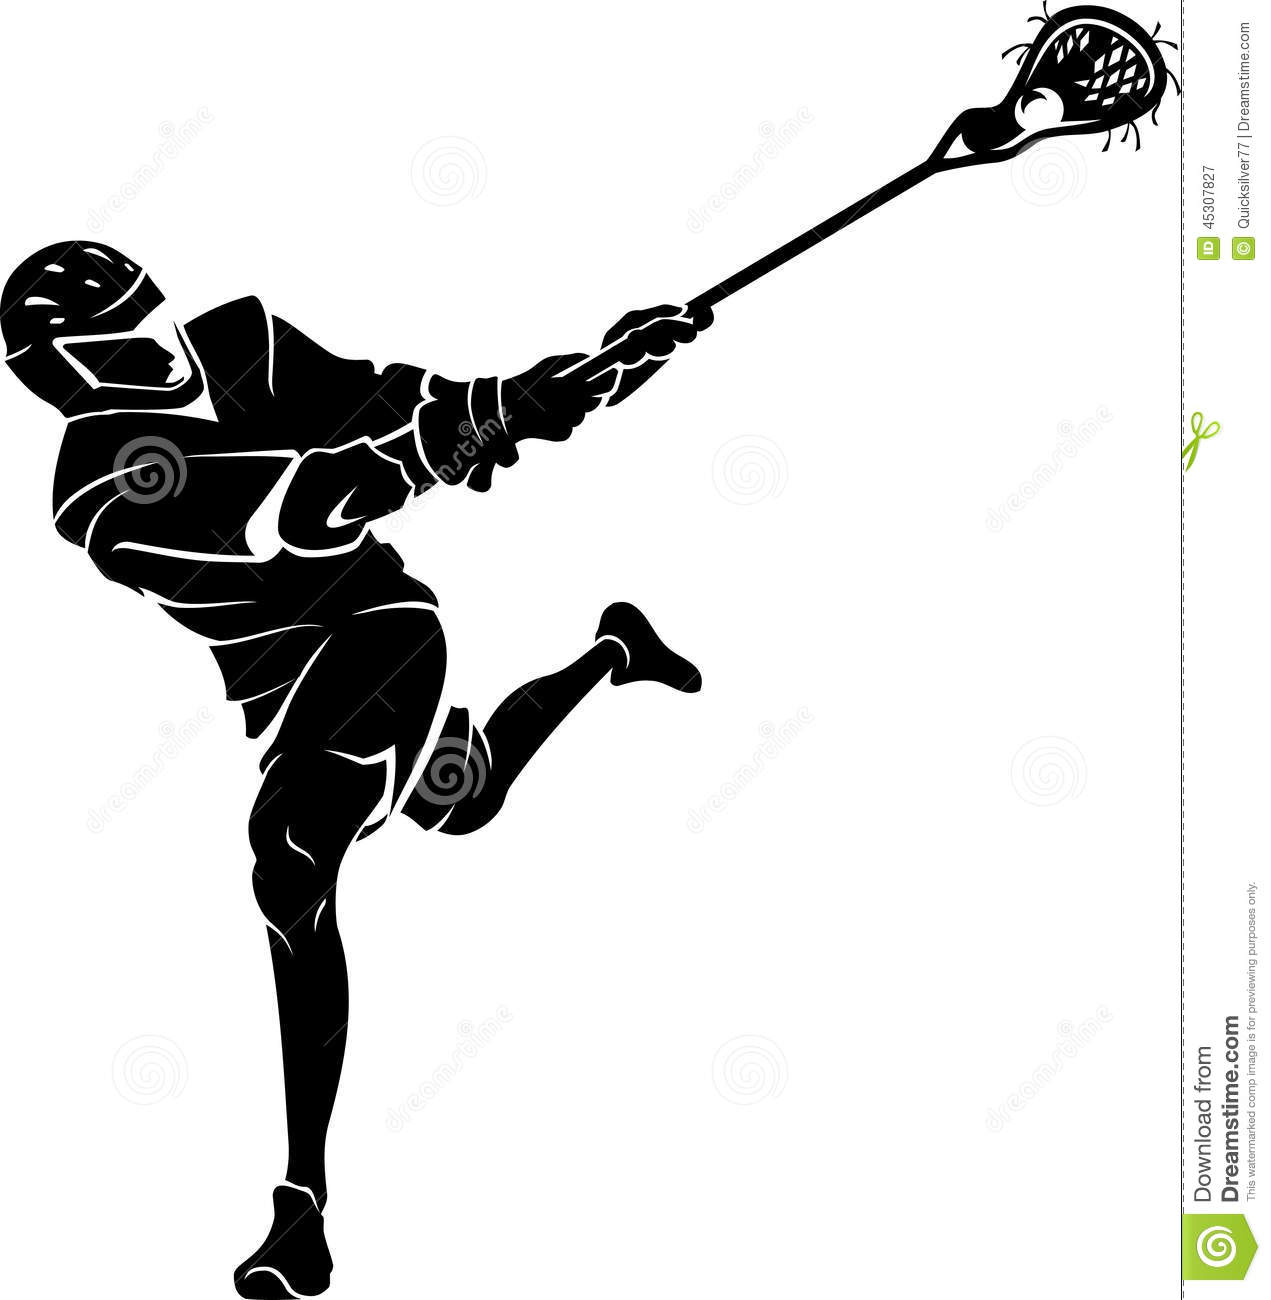 Male Silhouette Of Outdoor Athlete On White Background